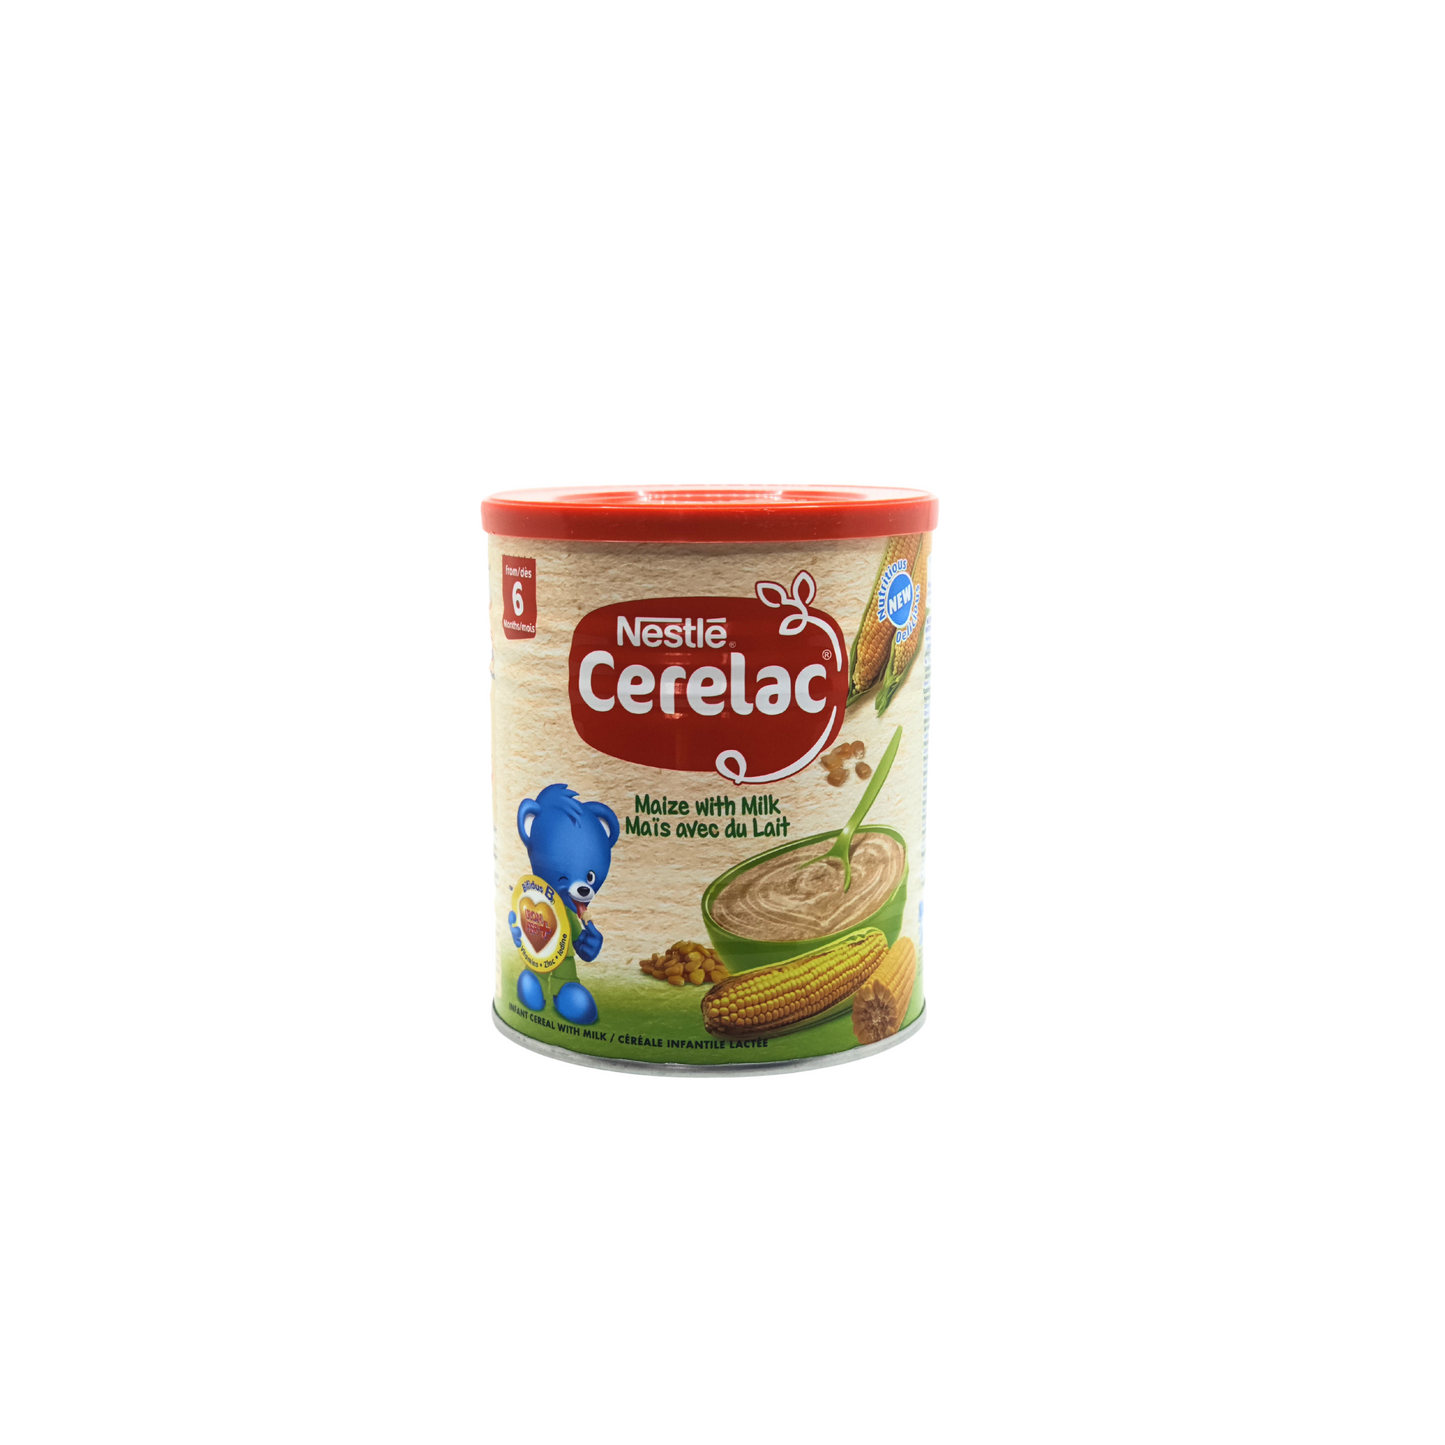 400 gram container of mestle cerelac maize with milk